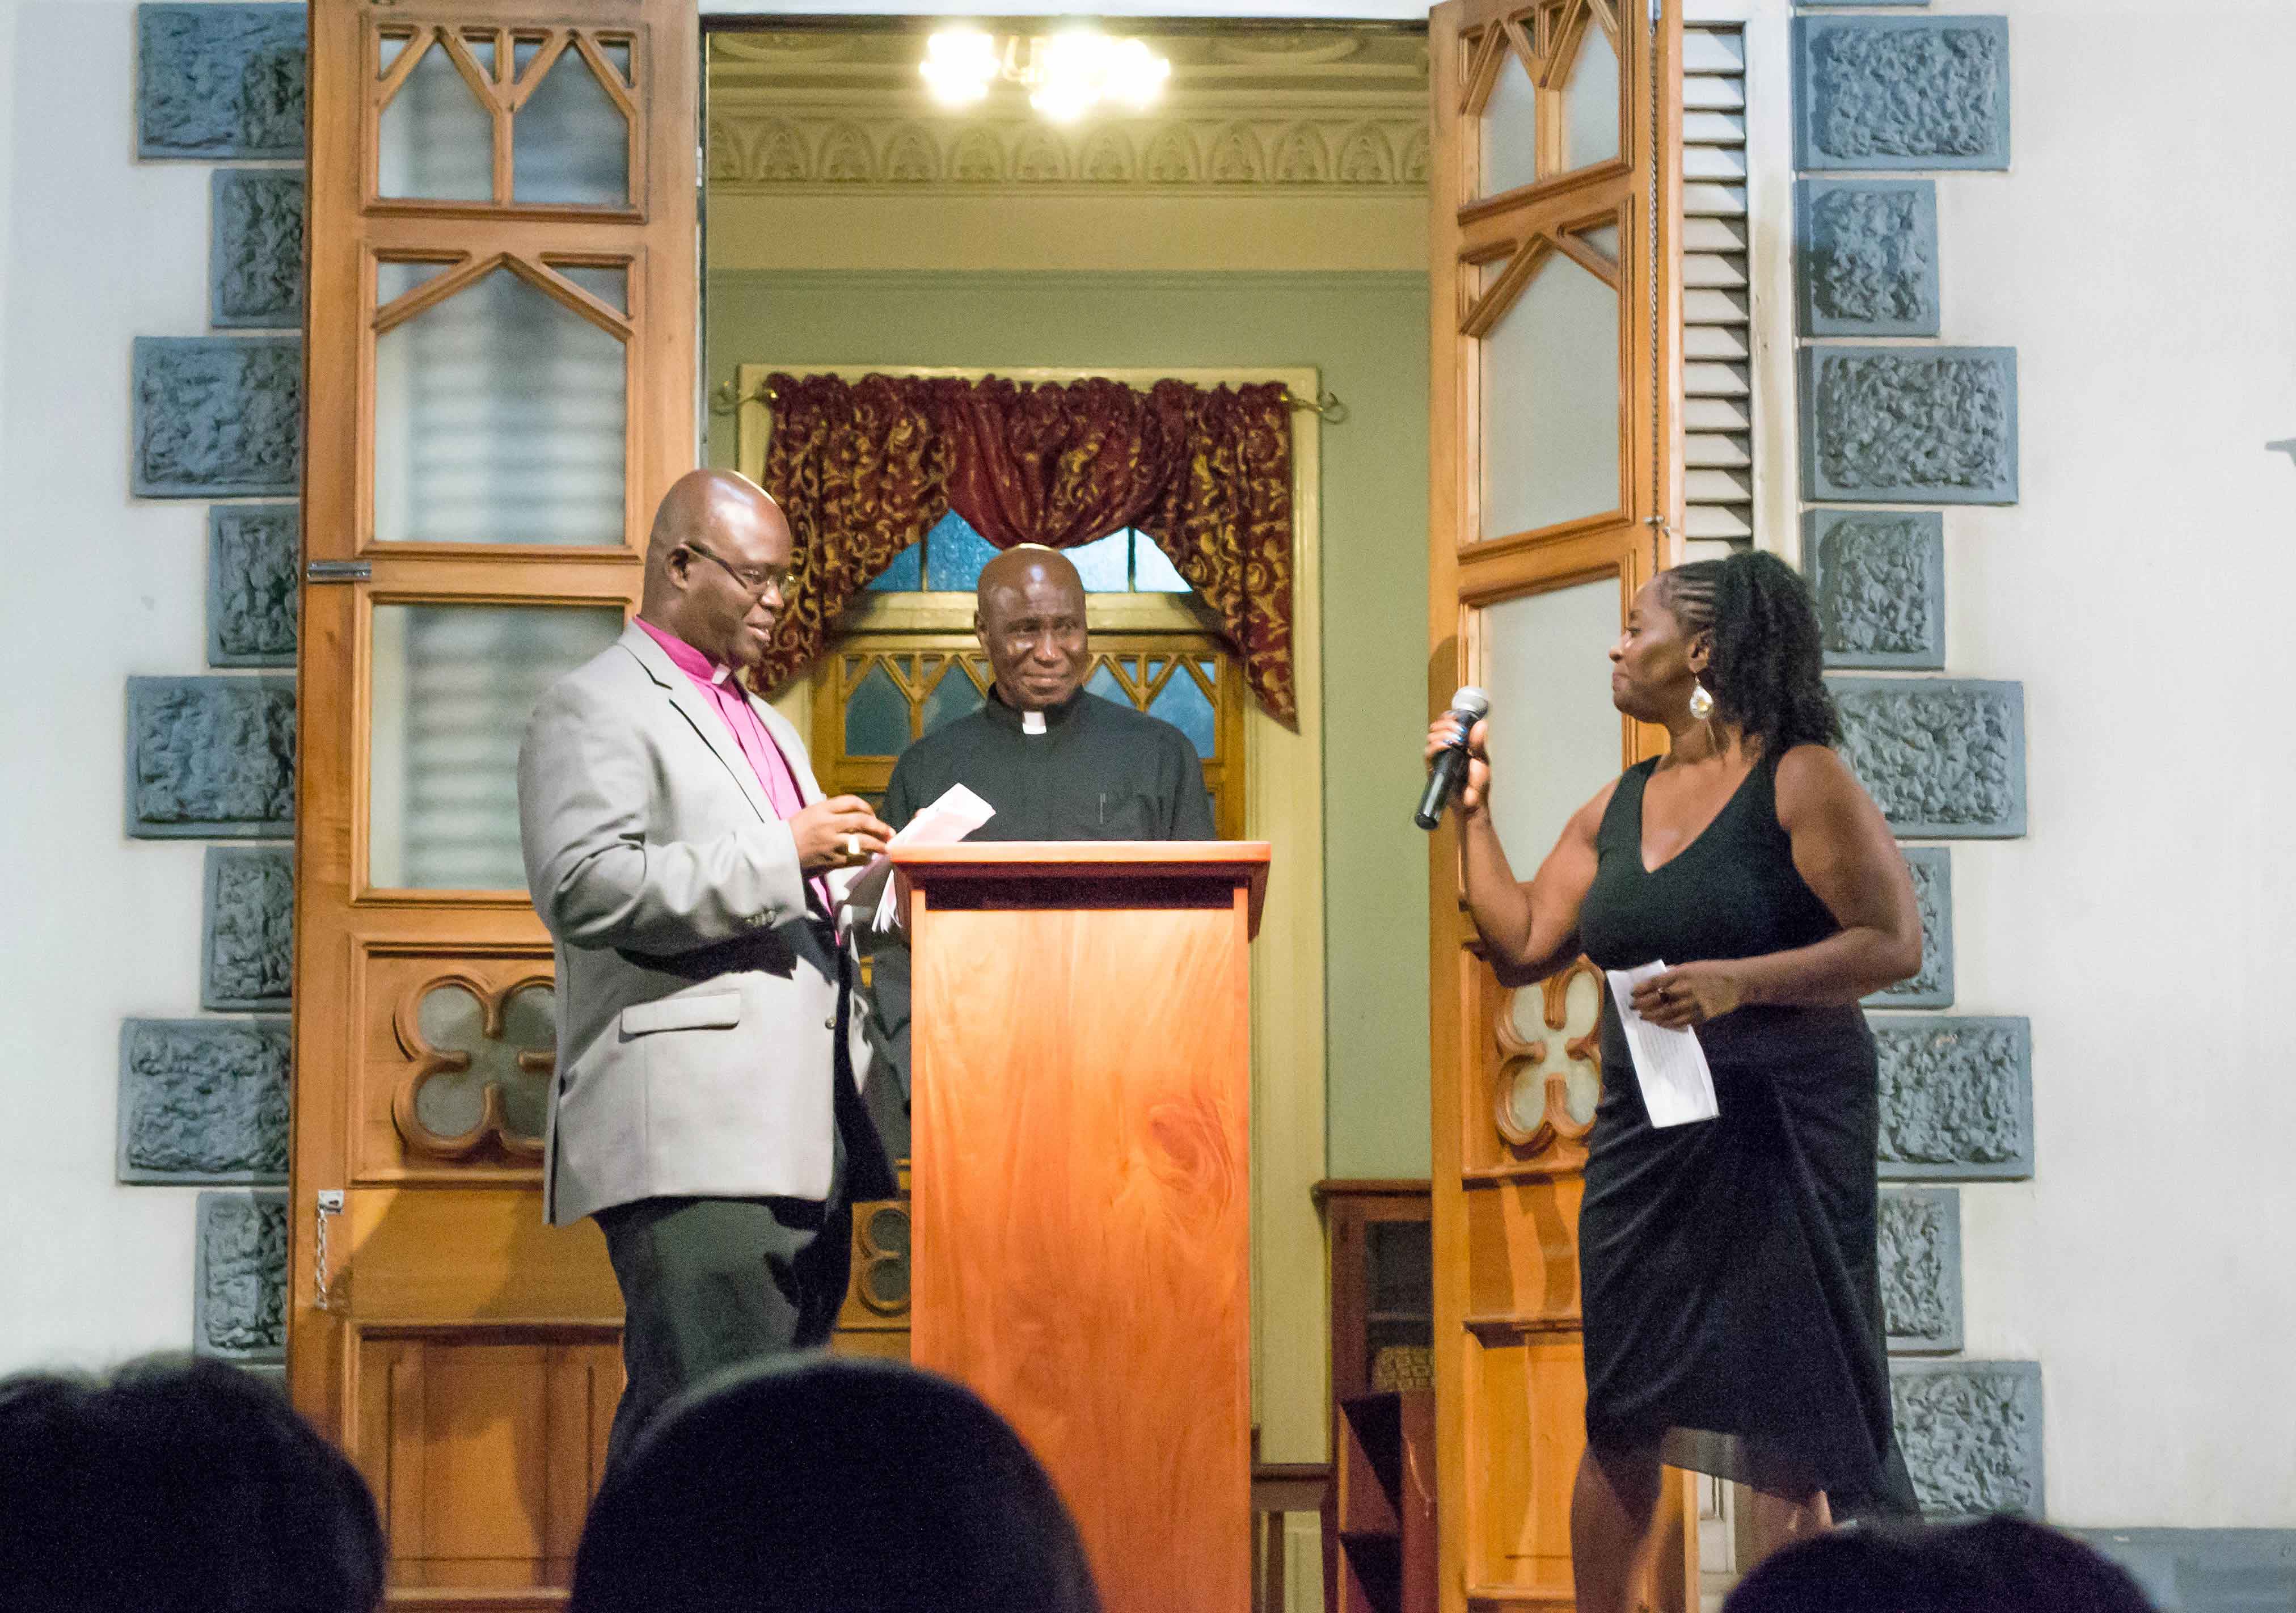 Master of Ceremonies, Magella Moreau, shares a light moment with Trinidad and Tobago’s Anglican Bishop, the Rt. Reverend Claude Berkley, and chairman of the Hayes Court Restoration Committee, Father Eric Thompson, during the evenings proceedings.